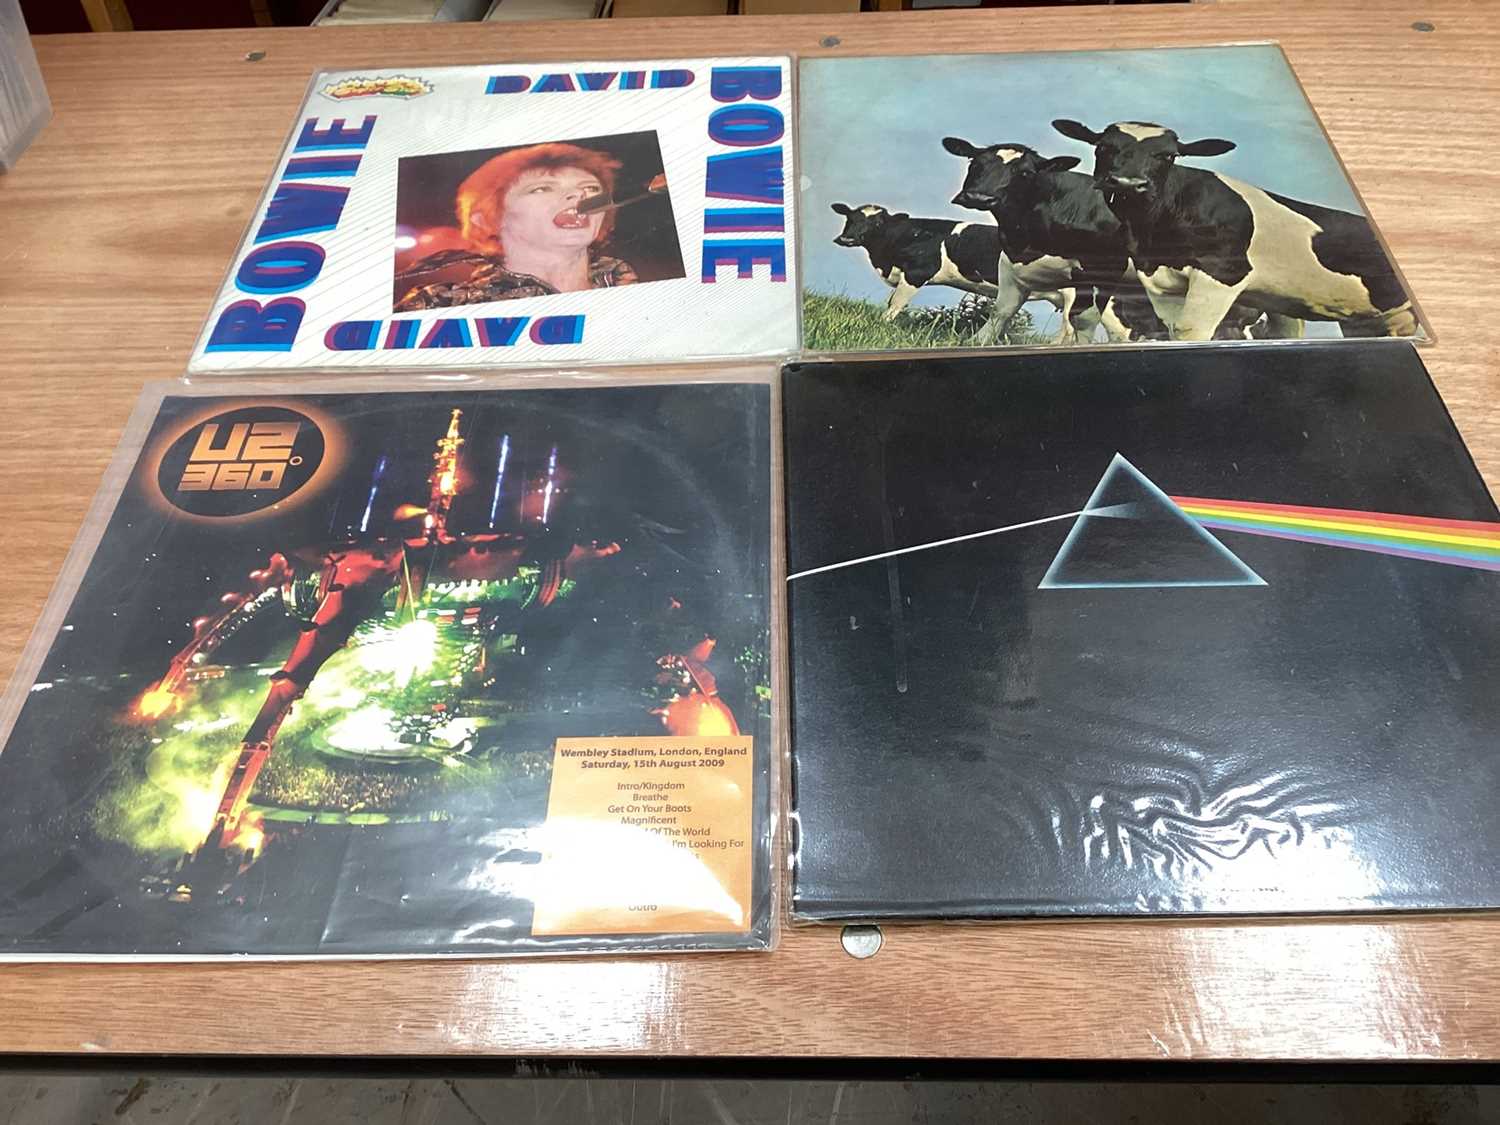 Box of LPs, including Beatles, David Bowie, Pink Floyd, Pixies, etc - Image 2 of 30